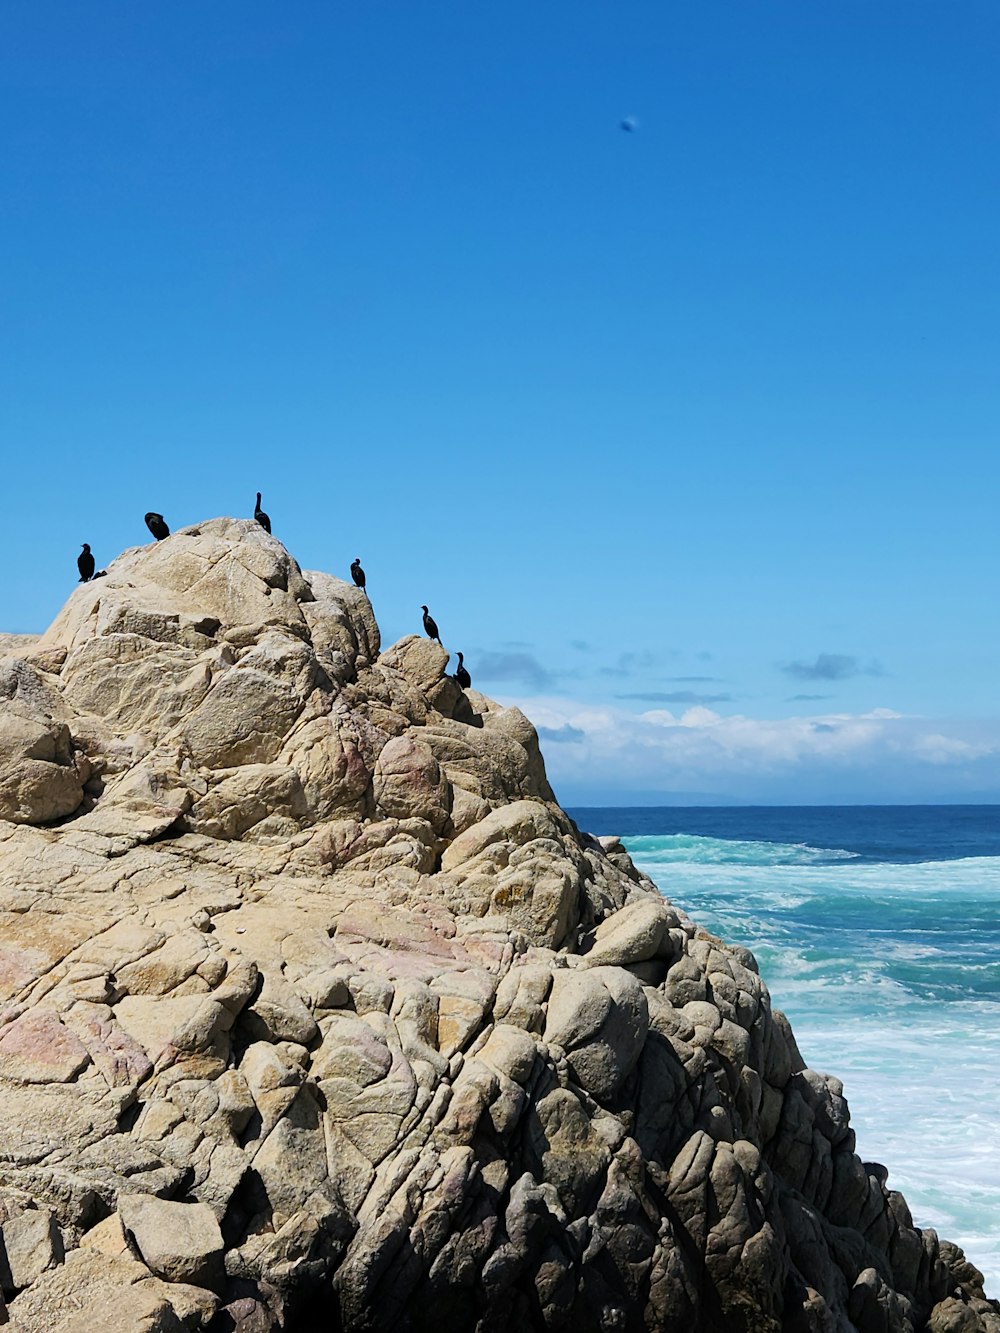 a flock of birds sitting on top of a large rock